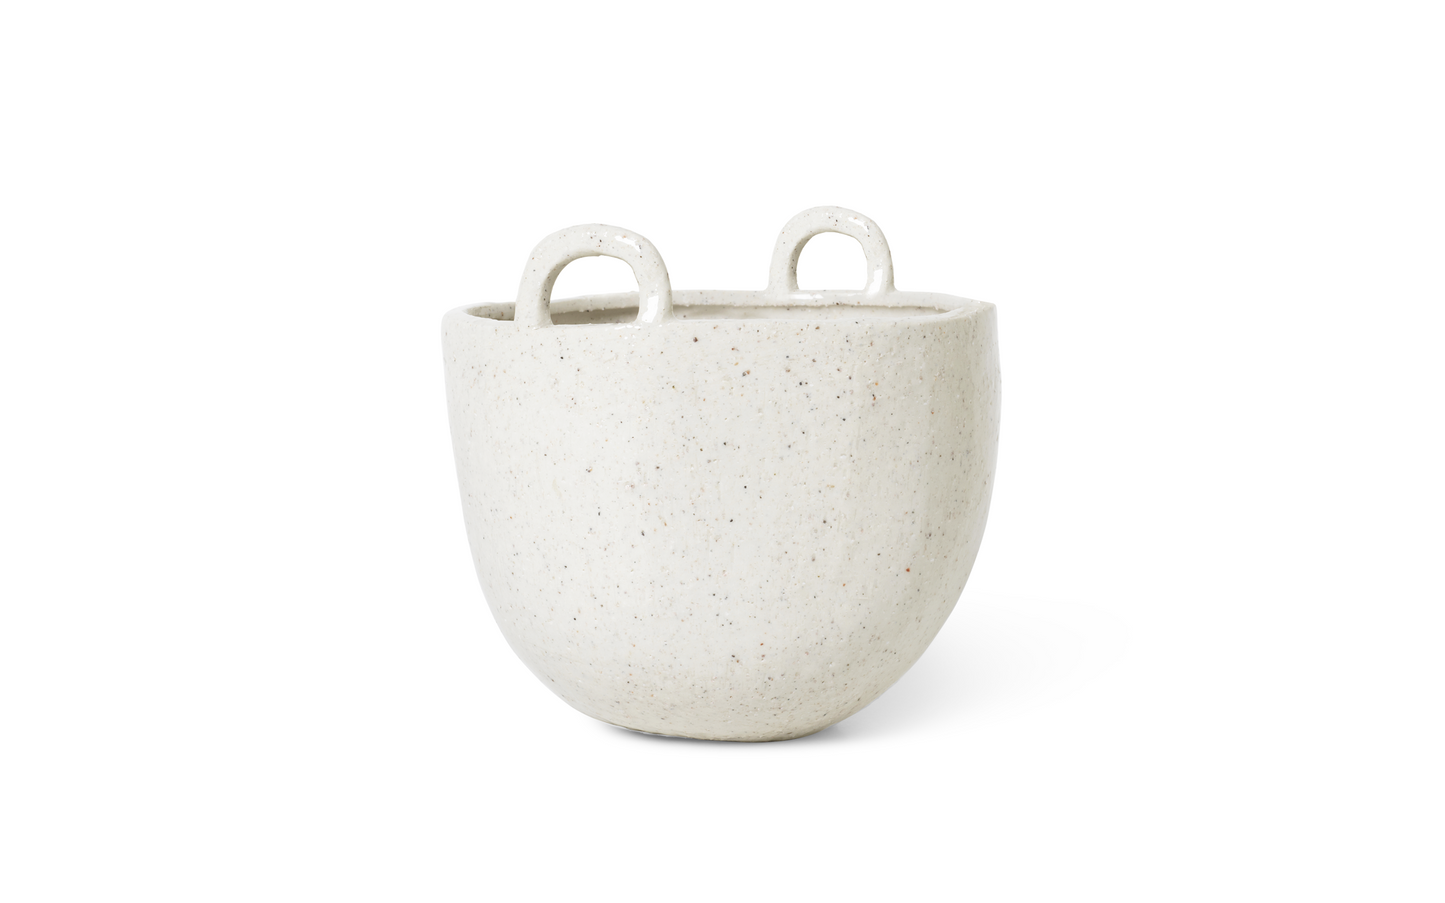 Speckle Pot by fermLIVING